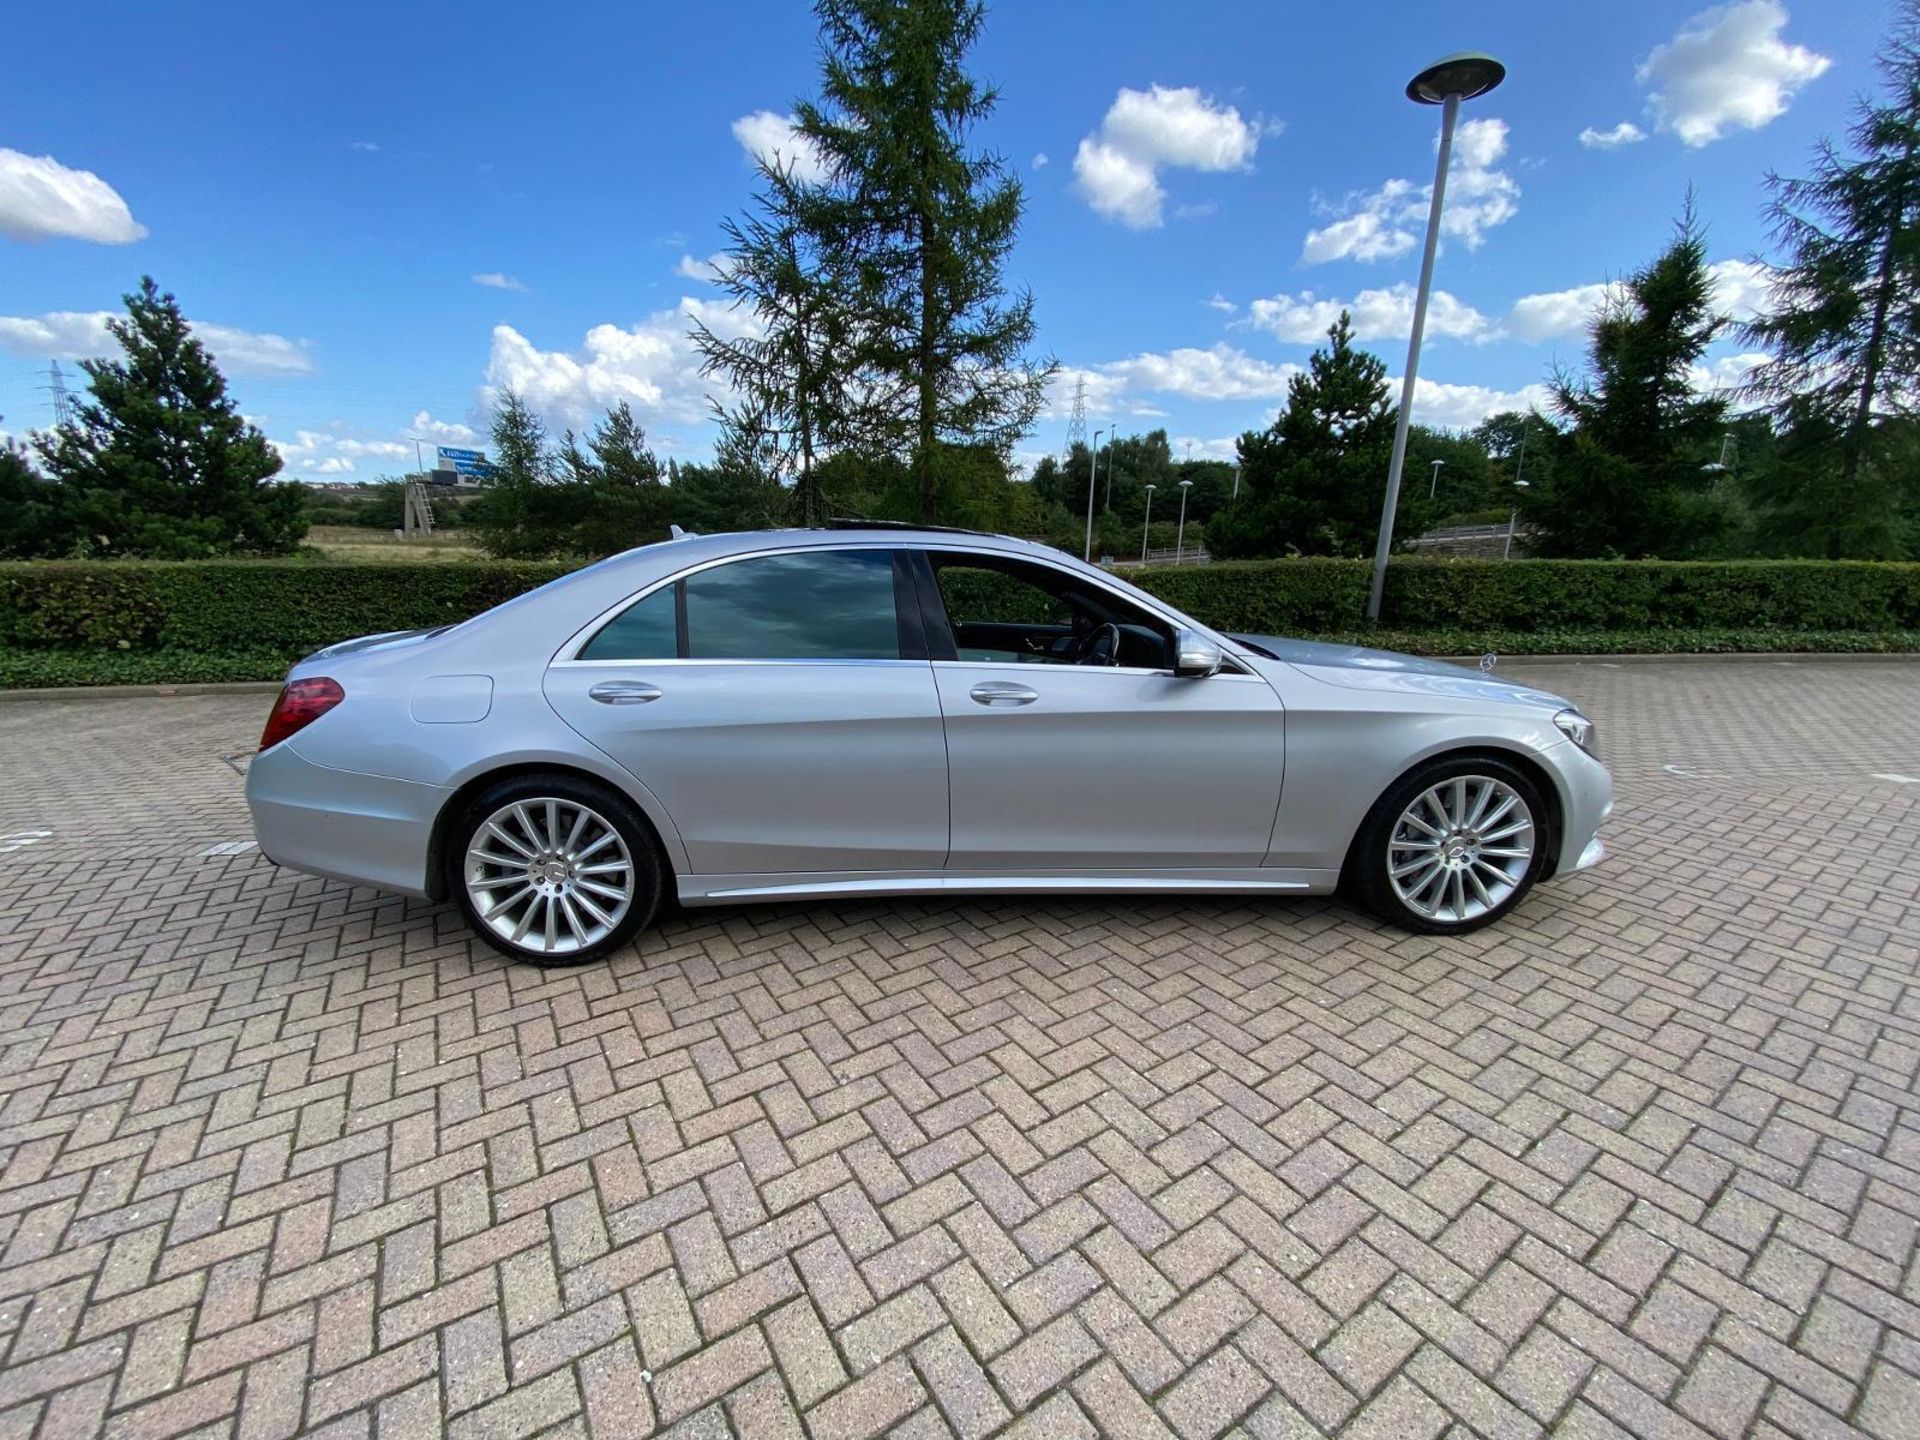 MERCEDES SCLASS S600 6.0 EXCLUSIVE ( 530BHP ) 7G-TRONIC PLUS L AMG LINE - Image 5 of 13